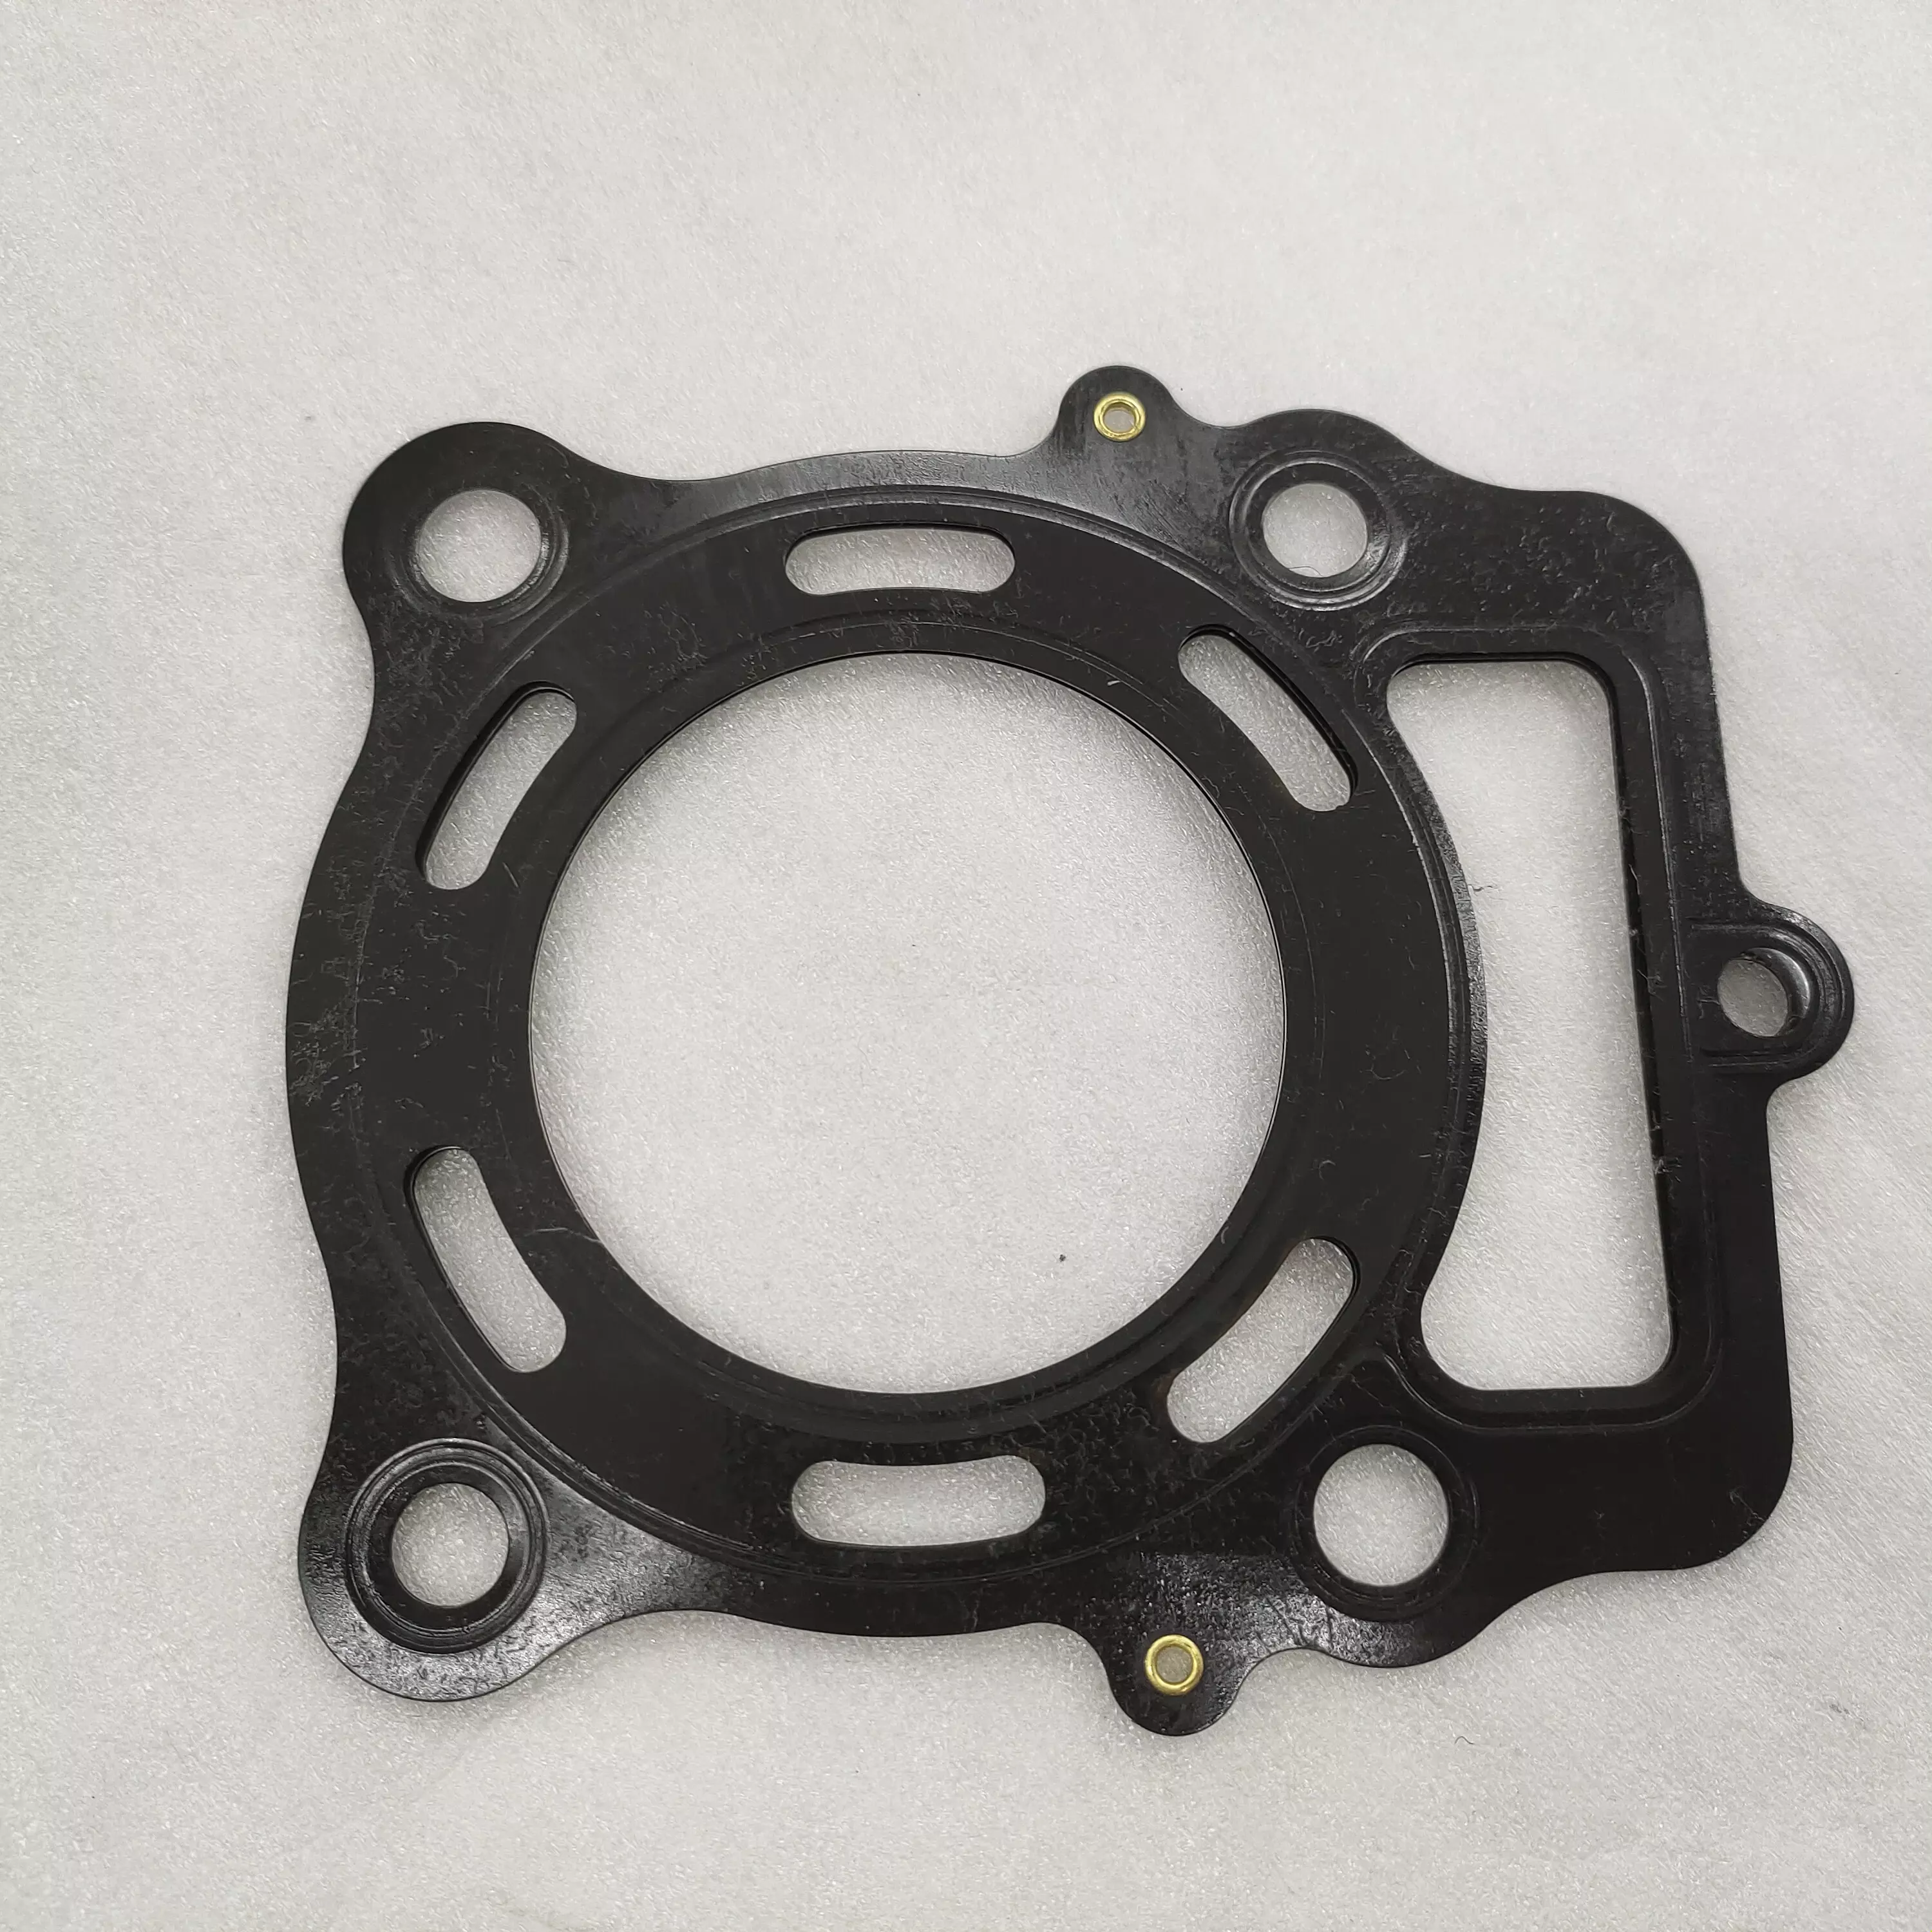 China top quality motorcycle spare parts tricycle LIFAN 250cc water-cooled engine cylinder assembly gasket for global market